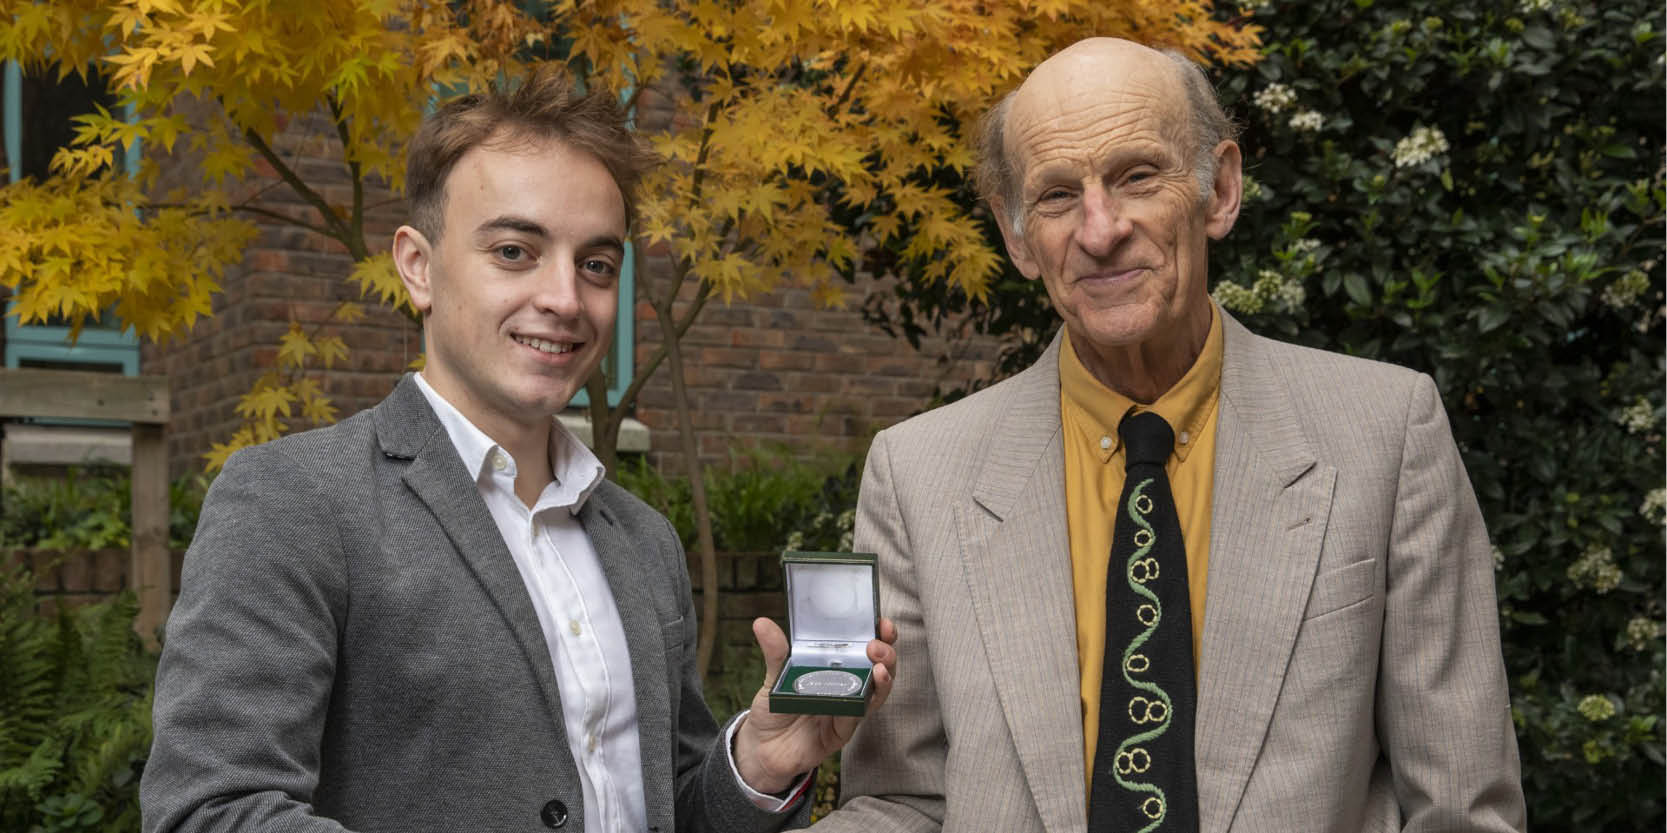 Professor John Atkins recognised at Researcher of the Year Awards